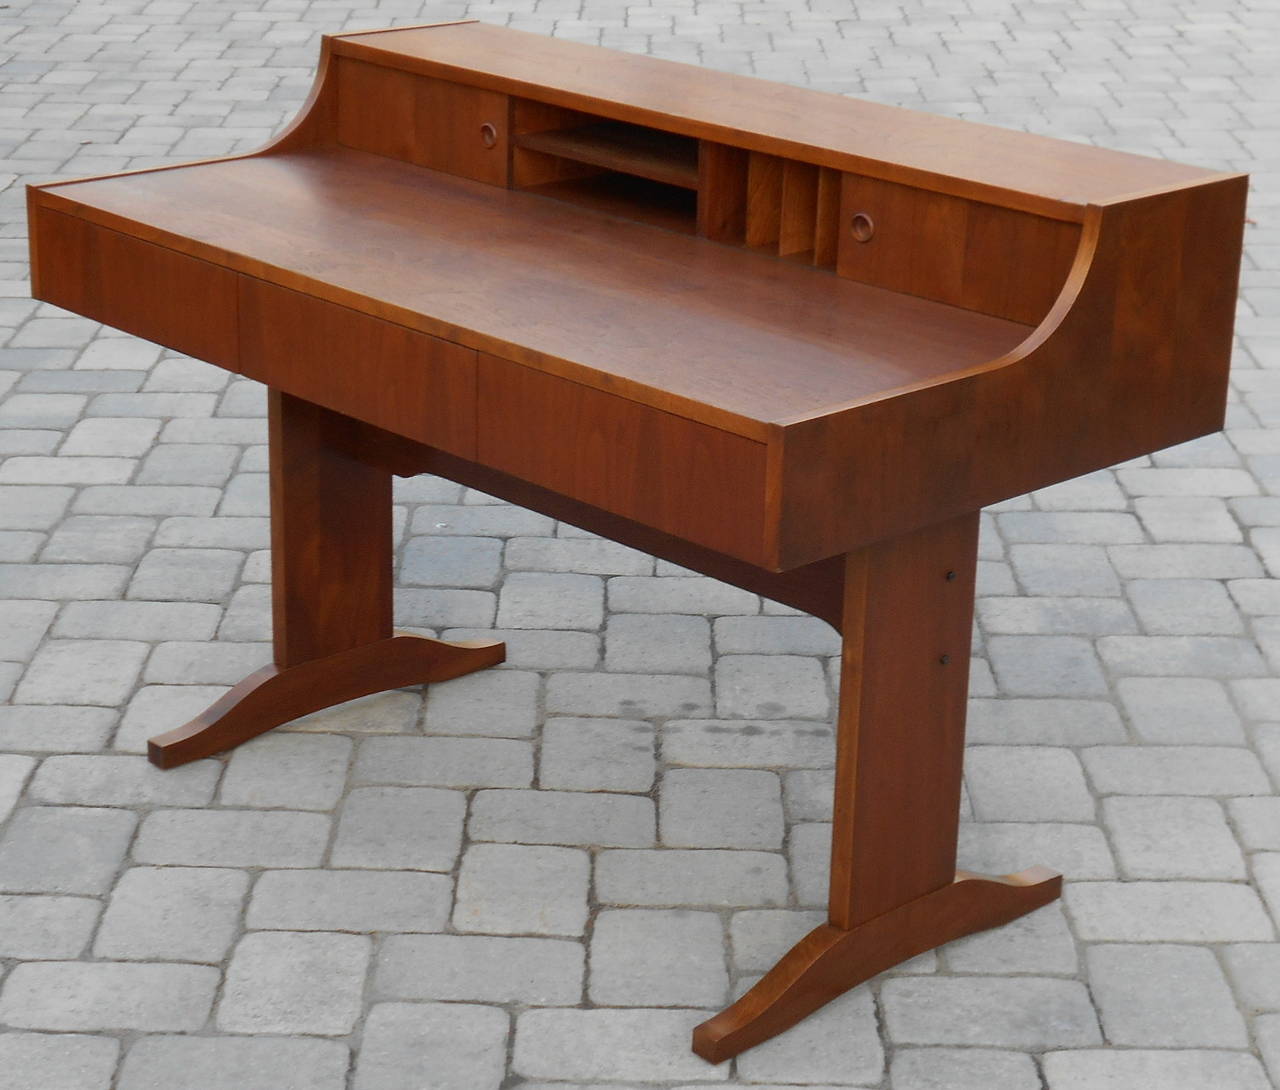 A 1970's Danish style teak writing desk. Three drawers for storage and a top section with sliding doors.